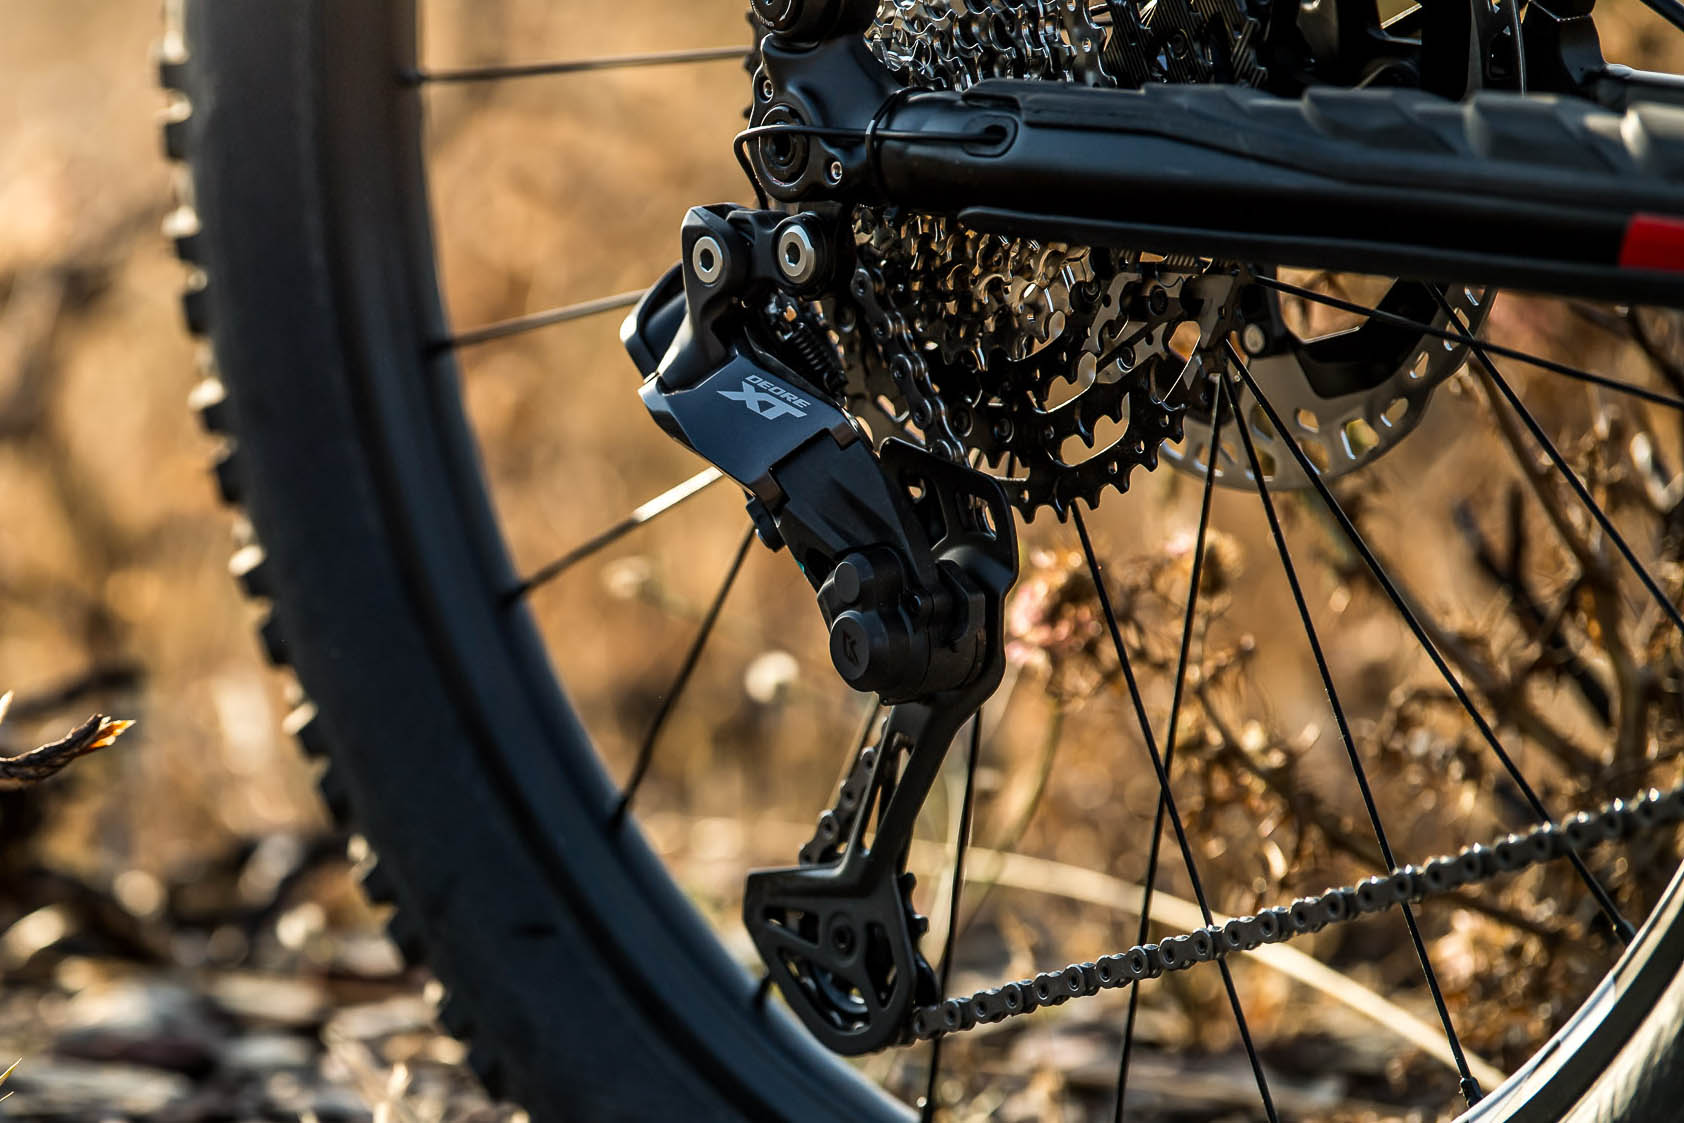 krijgen Plagen Eed Shimano resurrects electronic shifting for MTB, but with a caveat